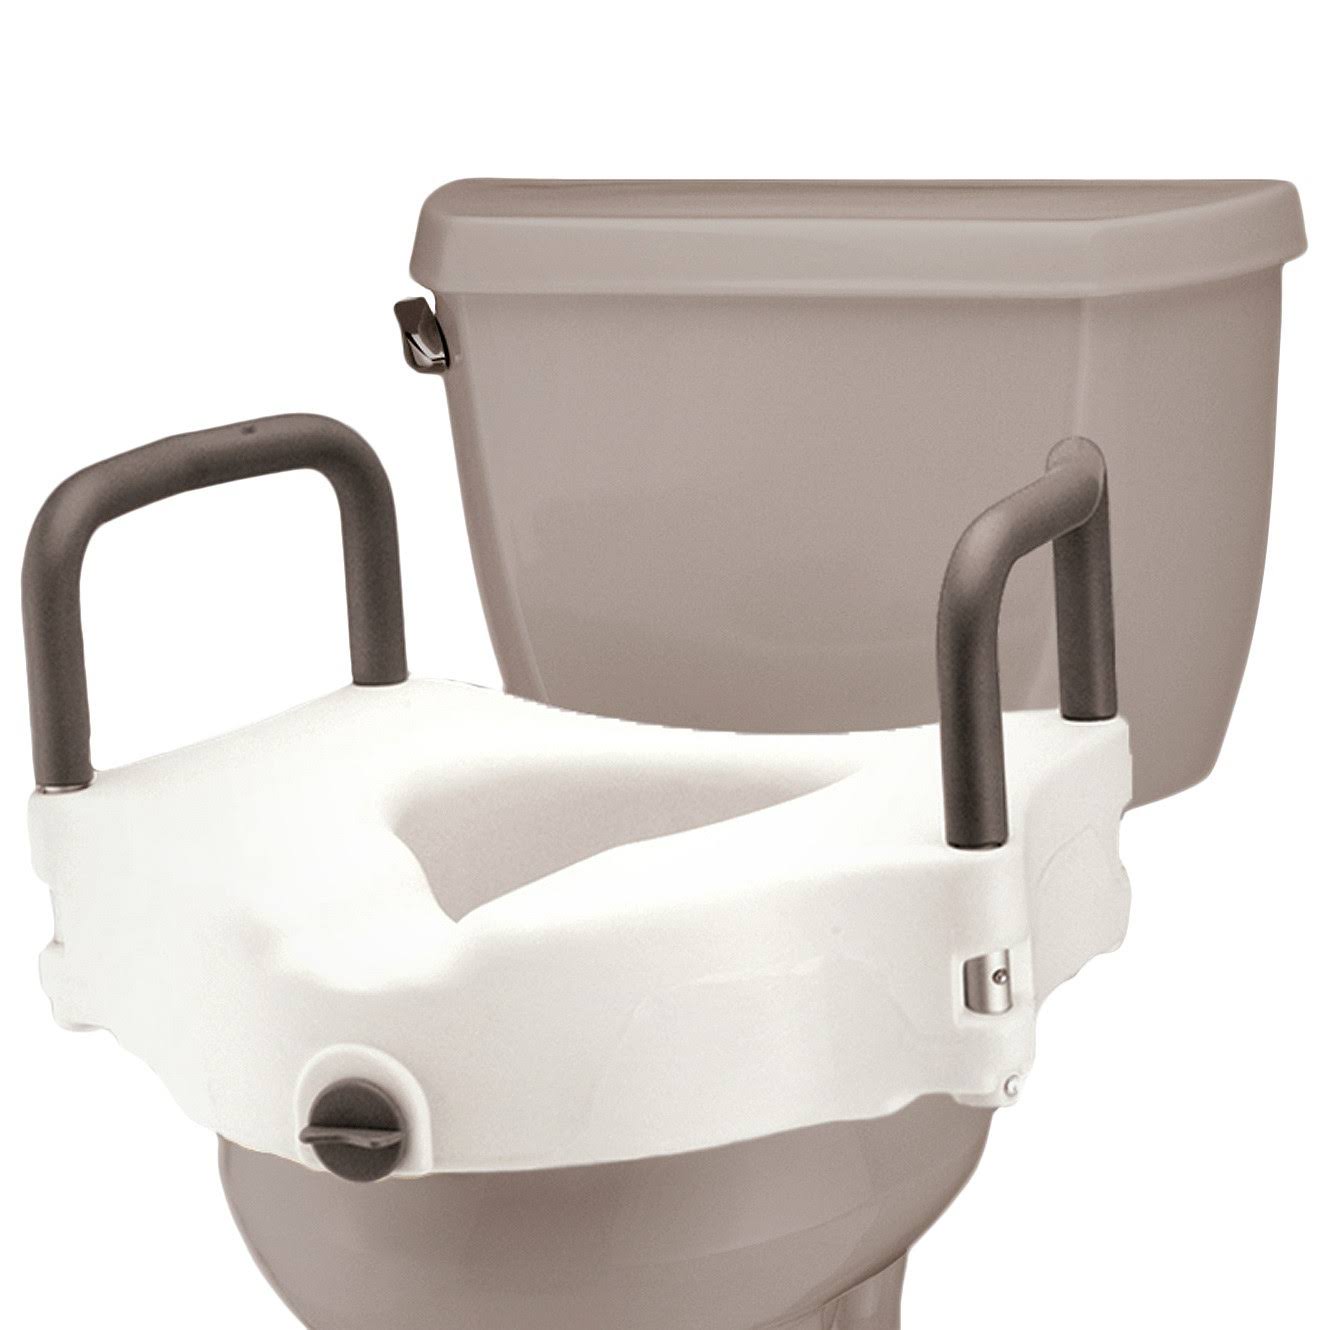 Nova Medical Products Locking Raised Toilet Seat - with Detachable Arms, 13cm , White